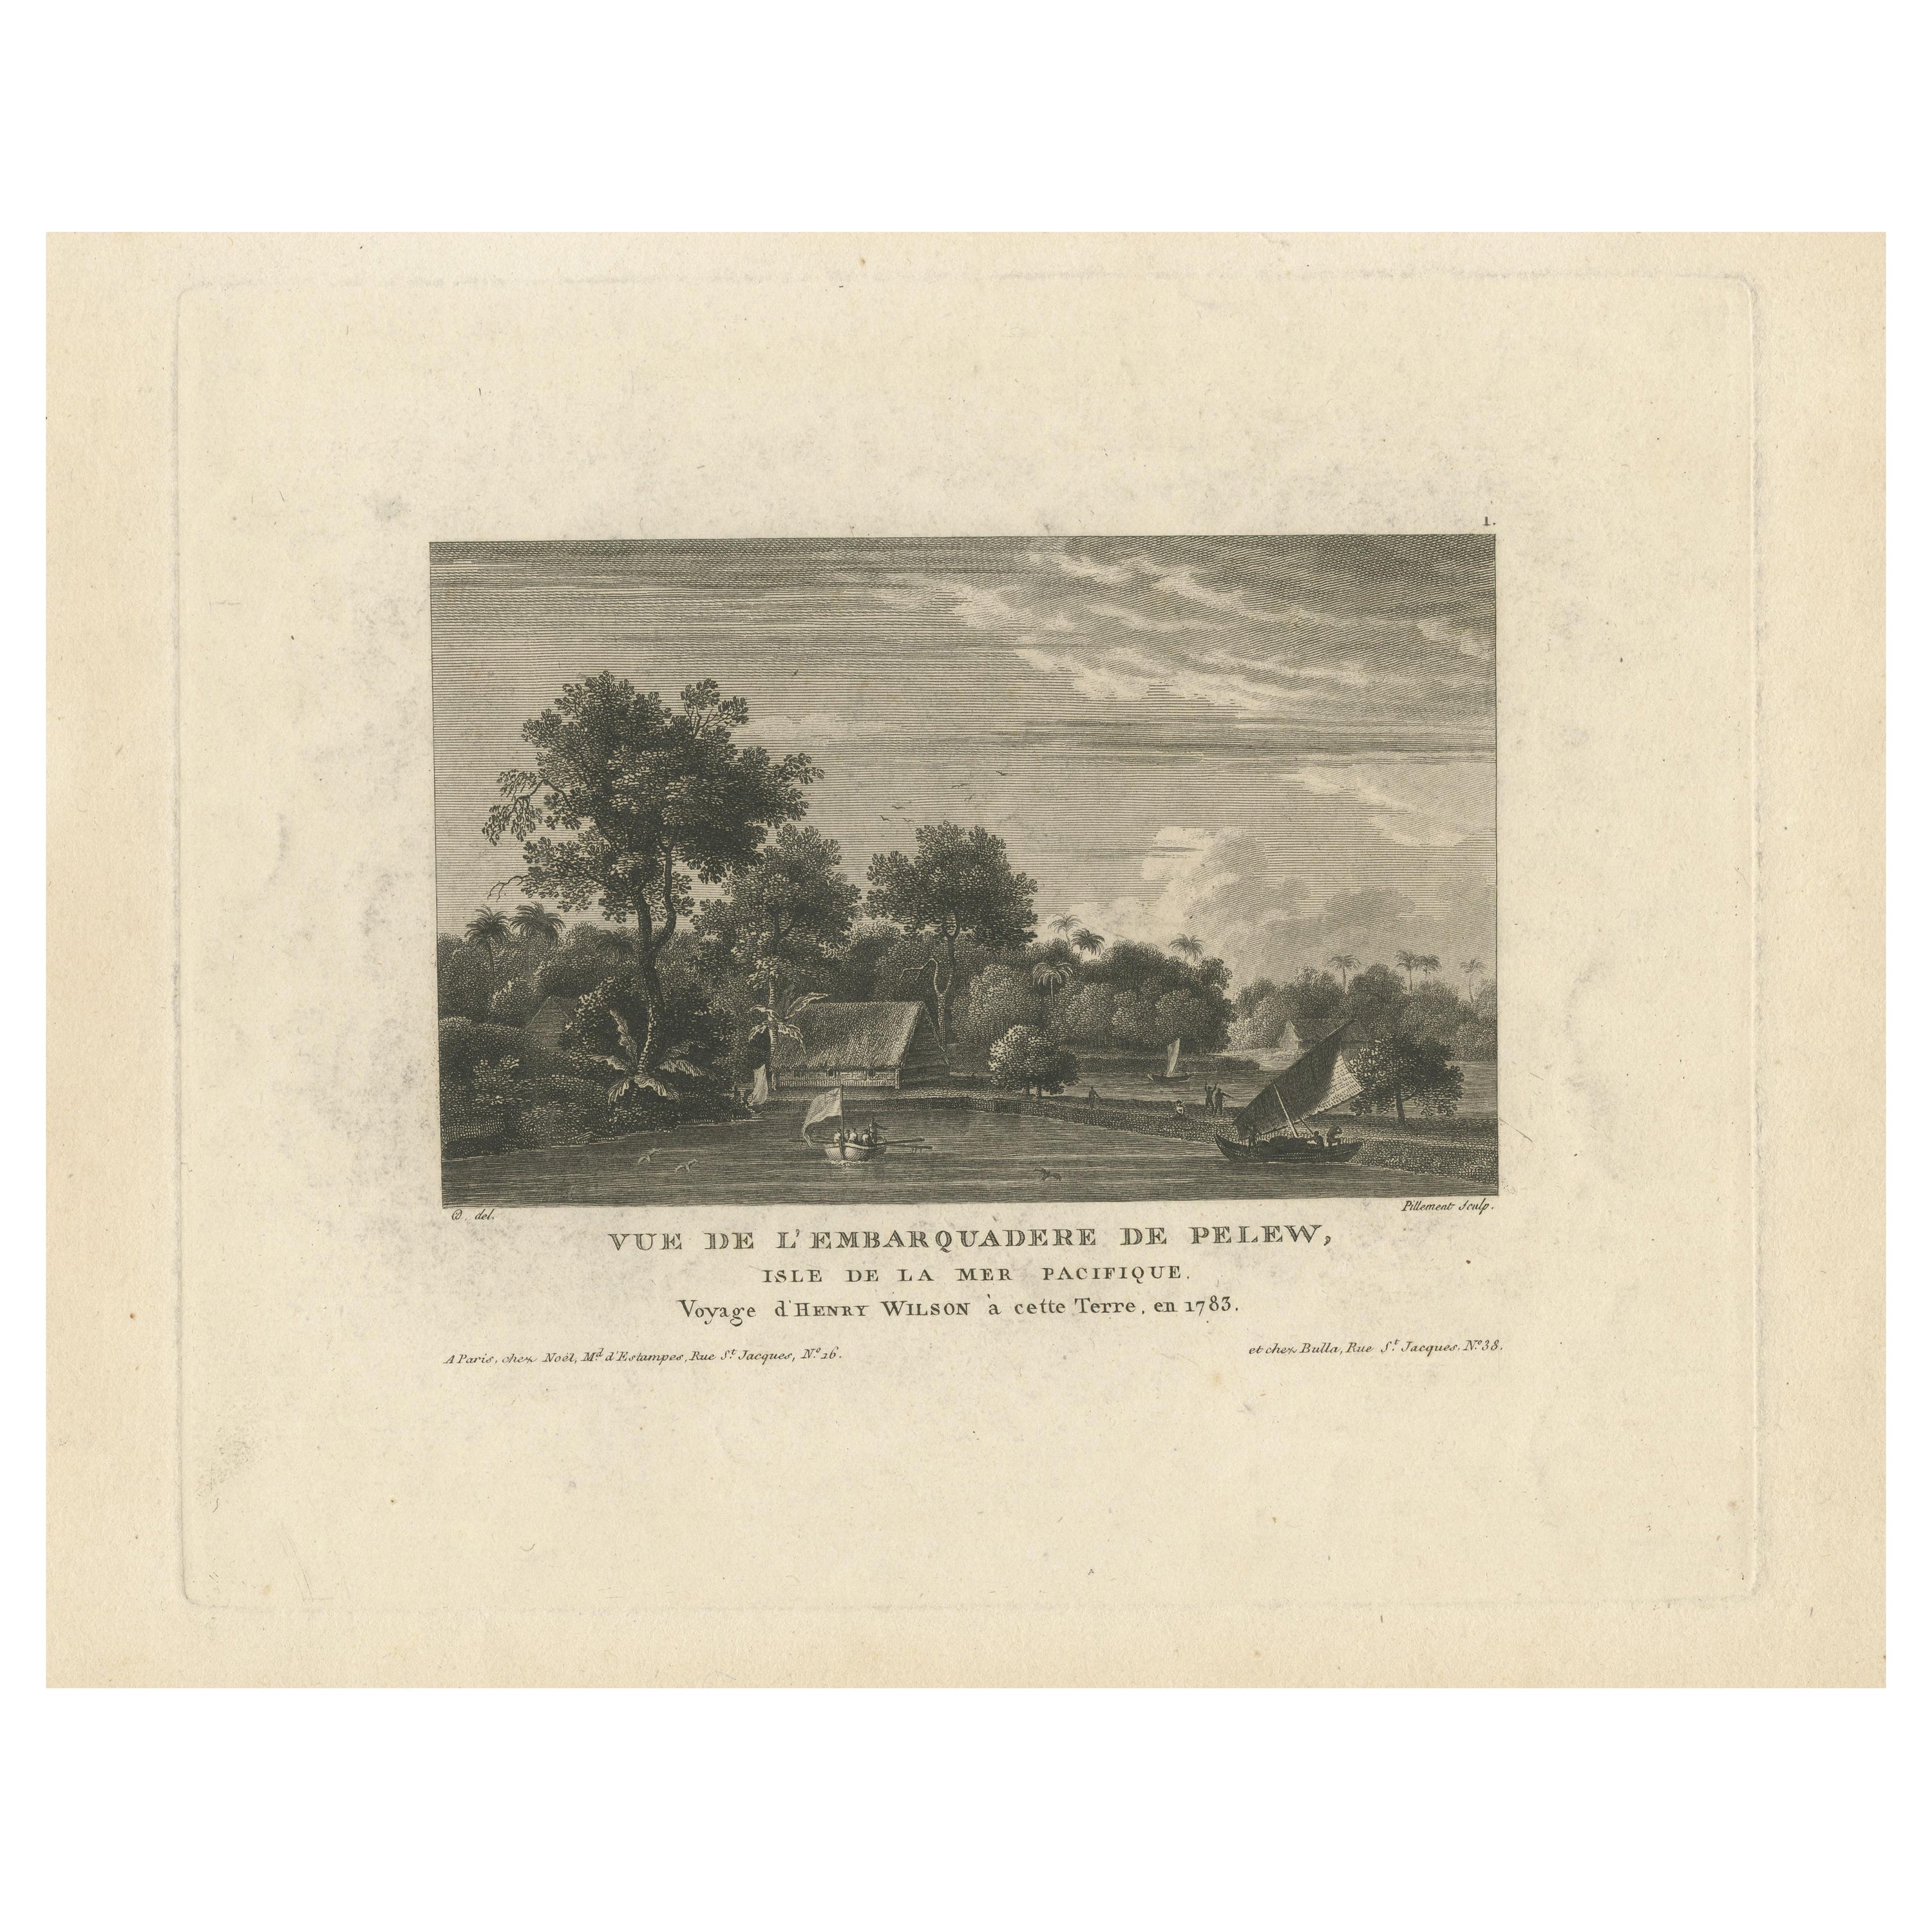 Antique Print with a View of 'Pelew' or the Island of Palau, Pacific For Sale